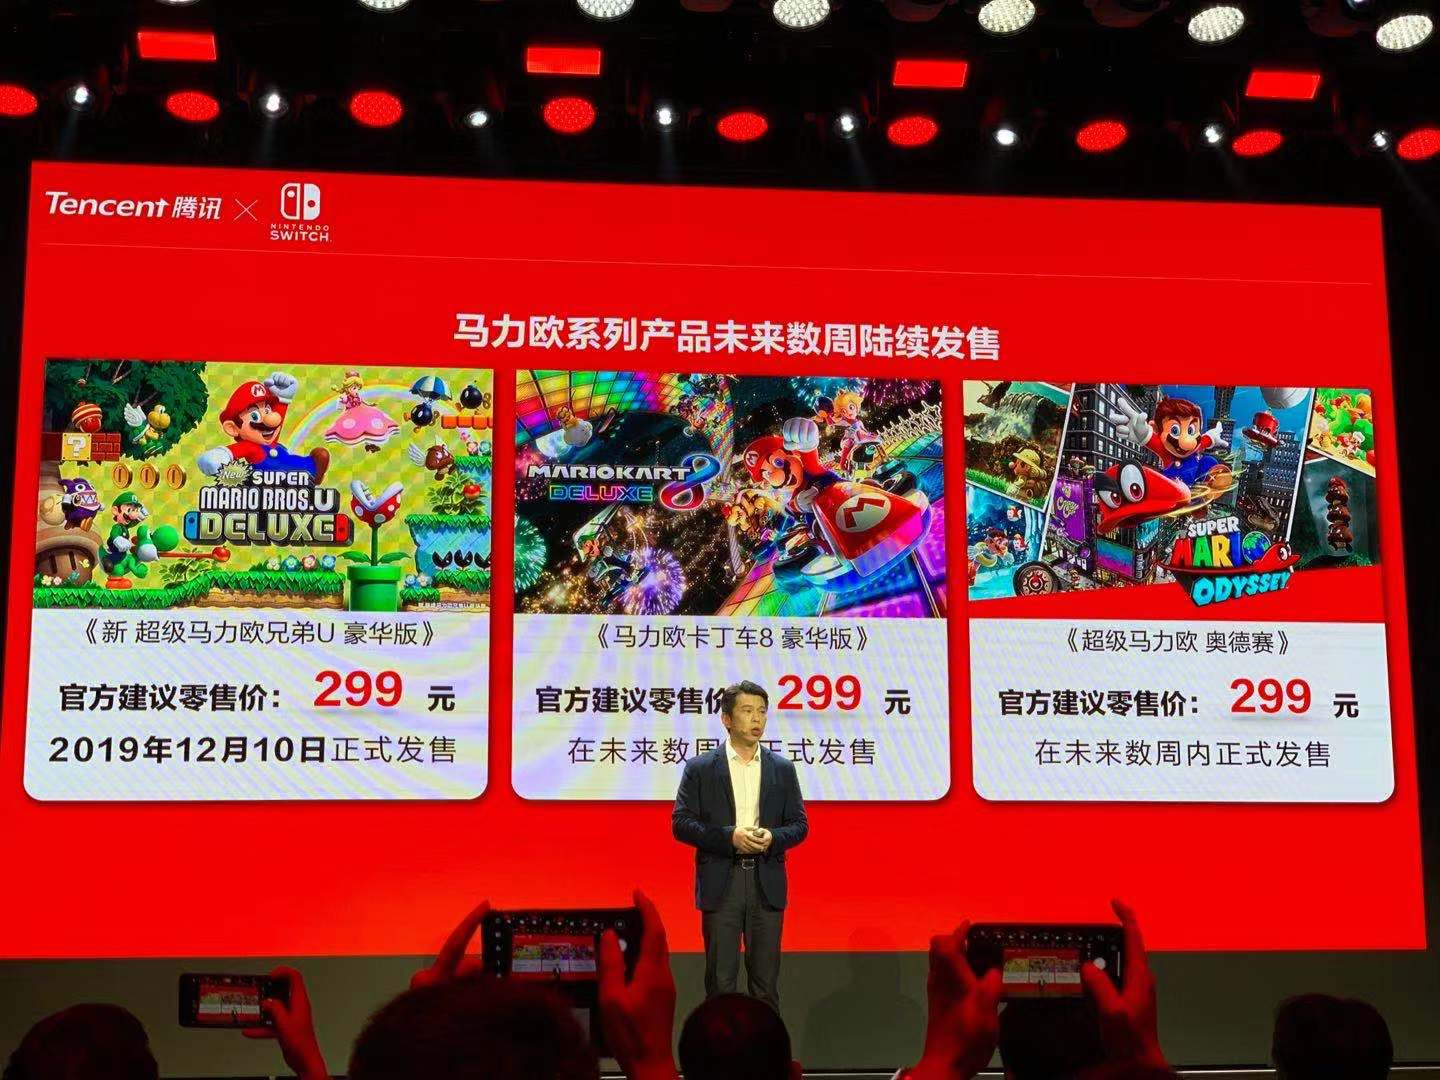 Frontline | National Bank Switch retail price is 2099 yuan, Tencent will help Nintendo enter the Chinese market